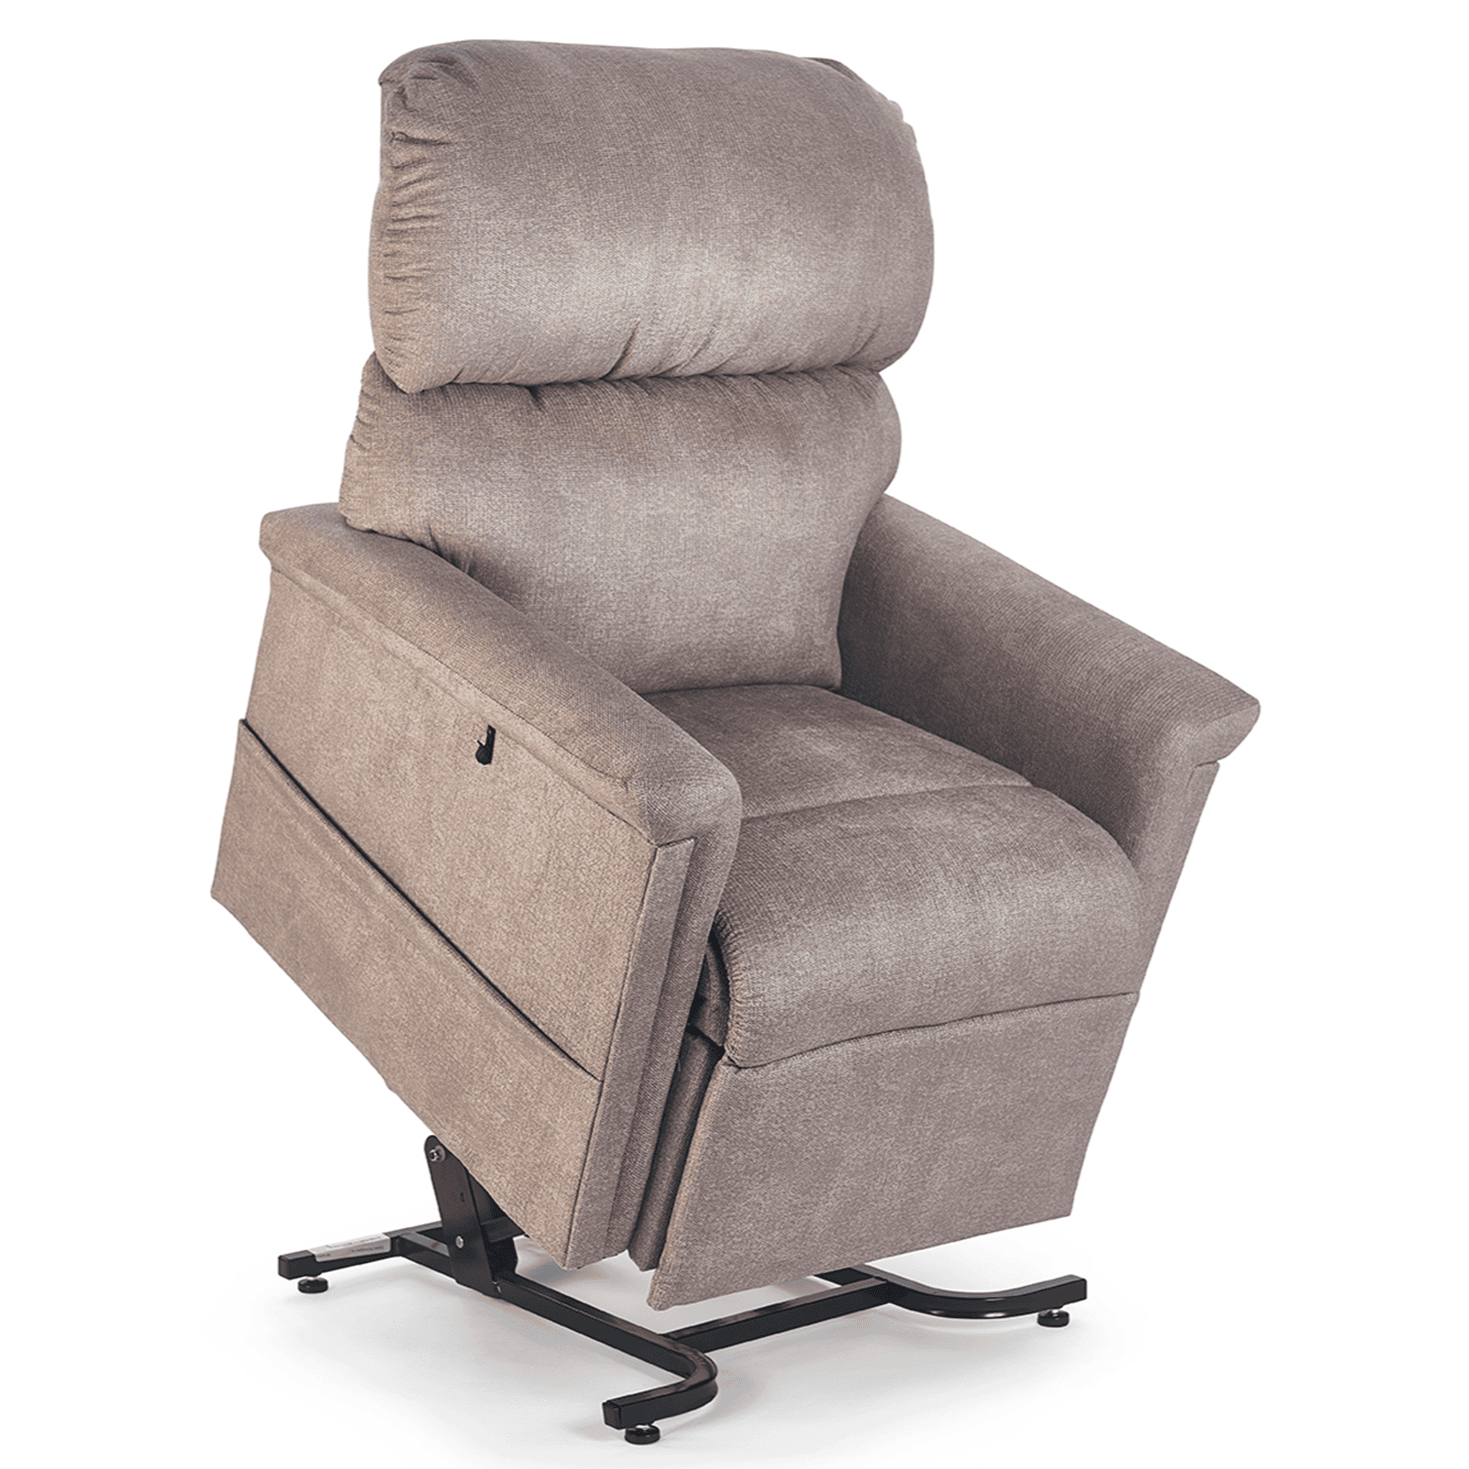  Mona Lift Chair Power Recliner, lifted